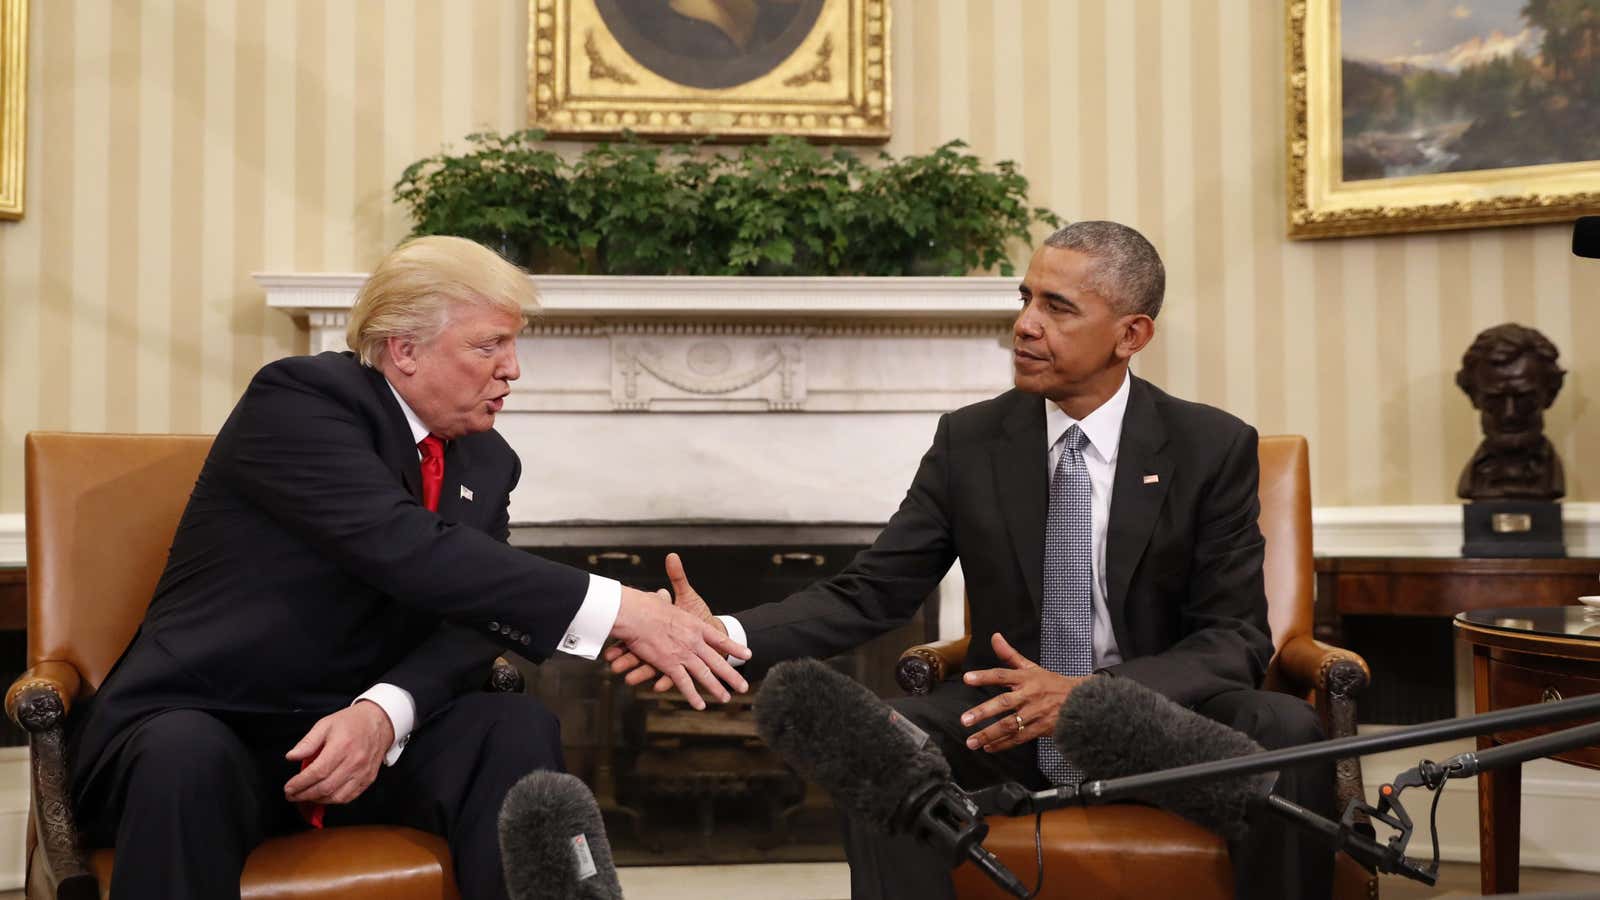 President Barack Obama shakes hands with President-elect Donald Trump in the Oval Office of the White House in Washington, Thursday, Nov. 10, 2016. (AP Photo/Pablo…